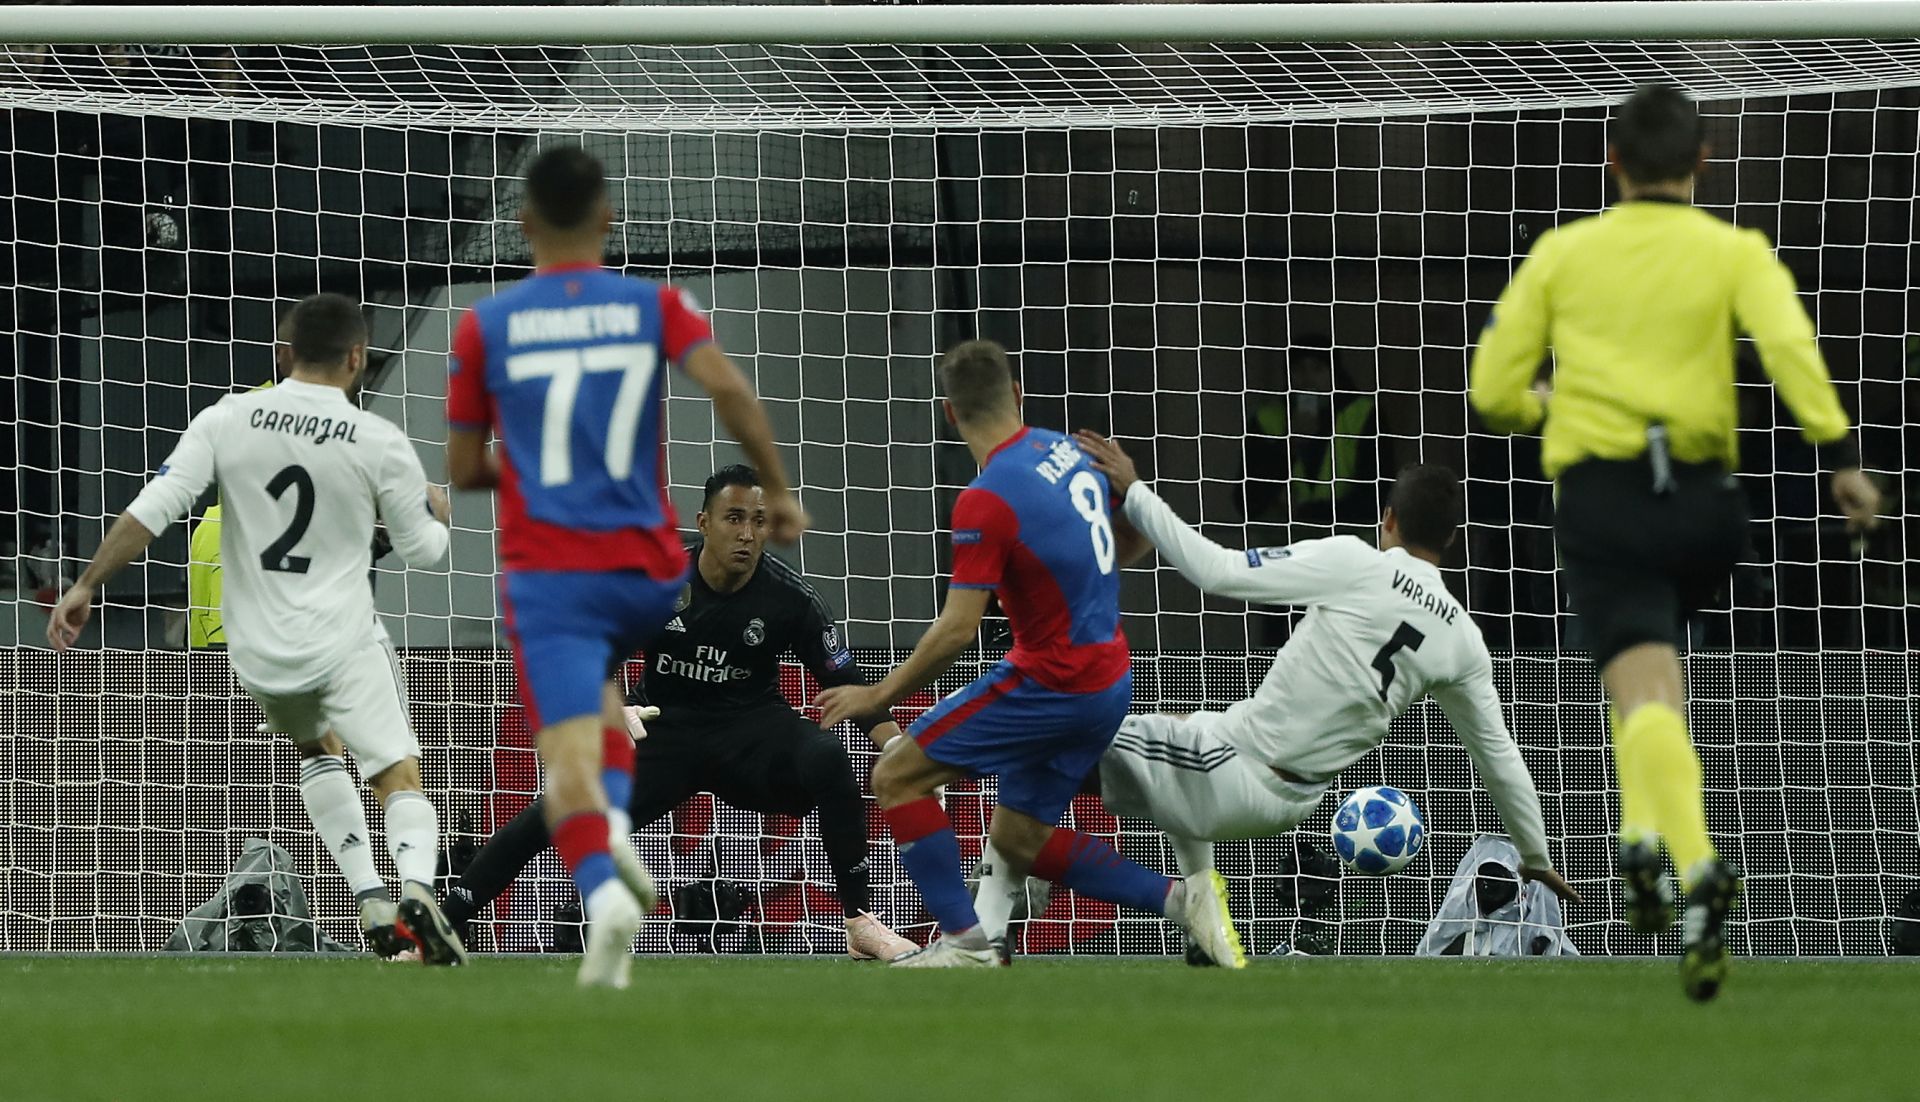 epa07064726 Nikola Vlasic (C) of PFC CSKA scores against Real Madrid during the UEFA Champions League group G soccer match between PFC CSKA Moskva and Real Madrid CF at the Luzhniki stadium in Moscow, Russia, 02 October 2018.  EPA/SERGEI ILNITSKY